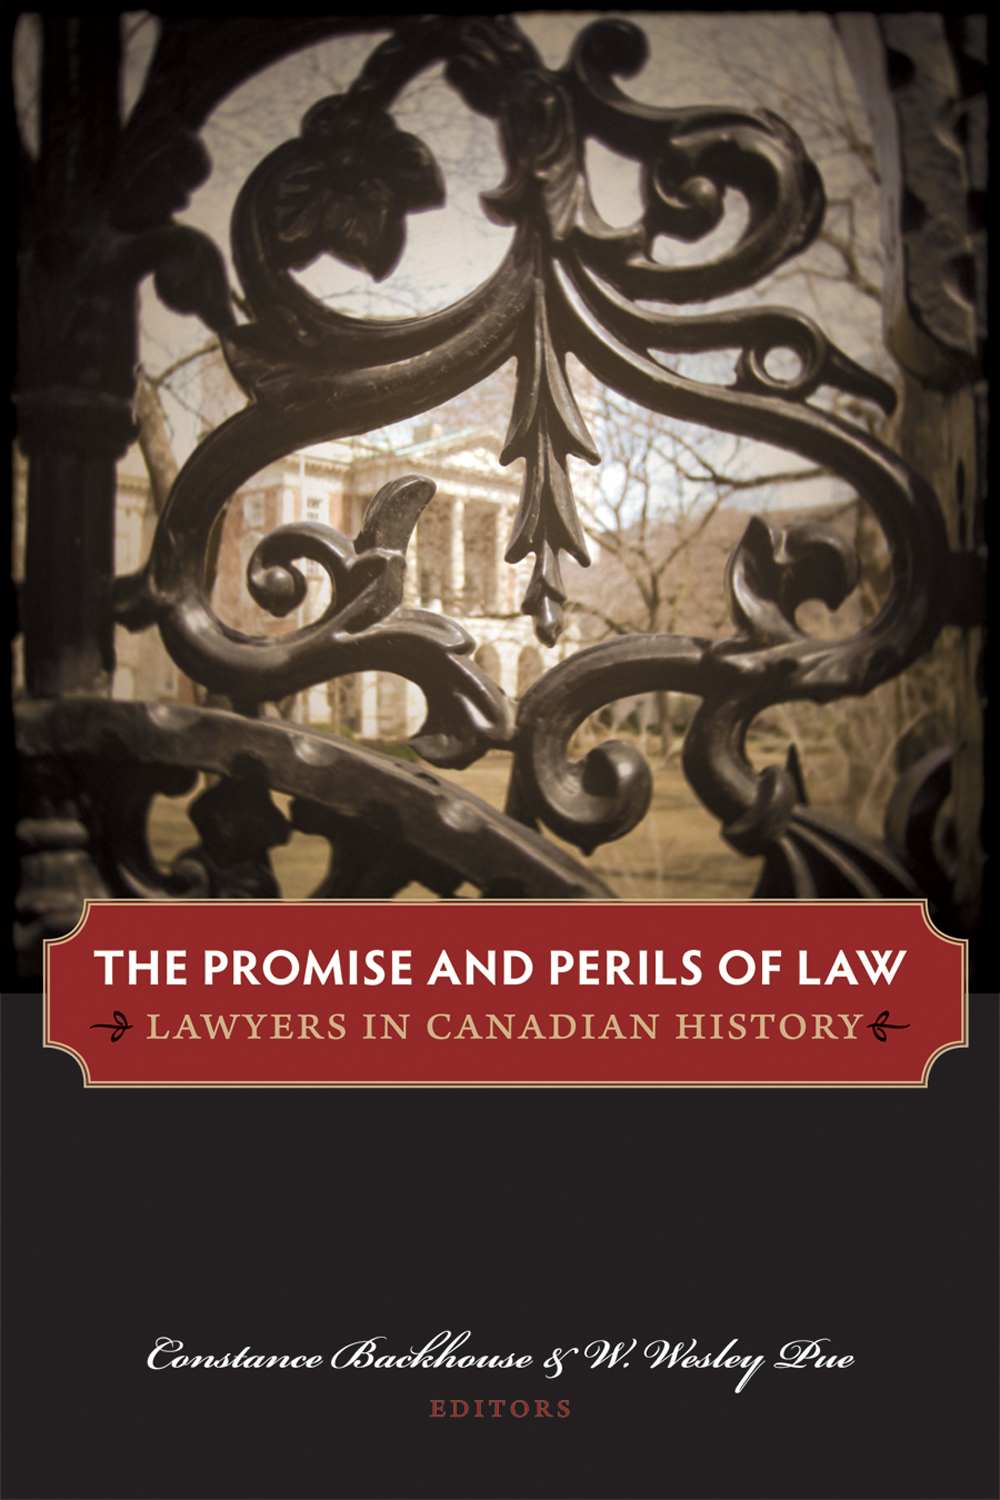 The Promise and Perils of Law